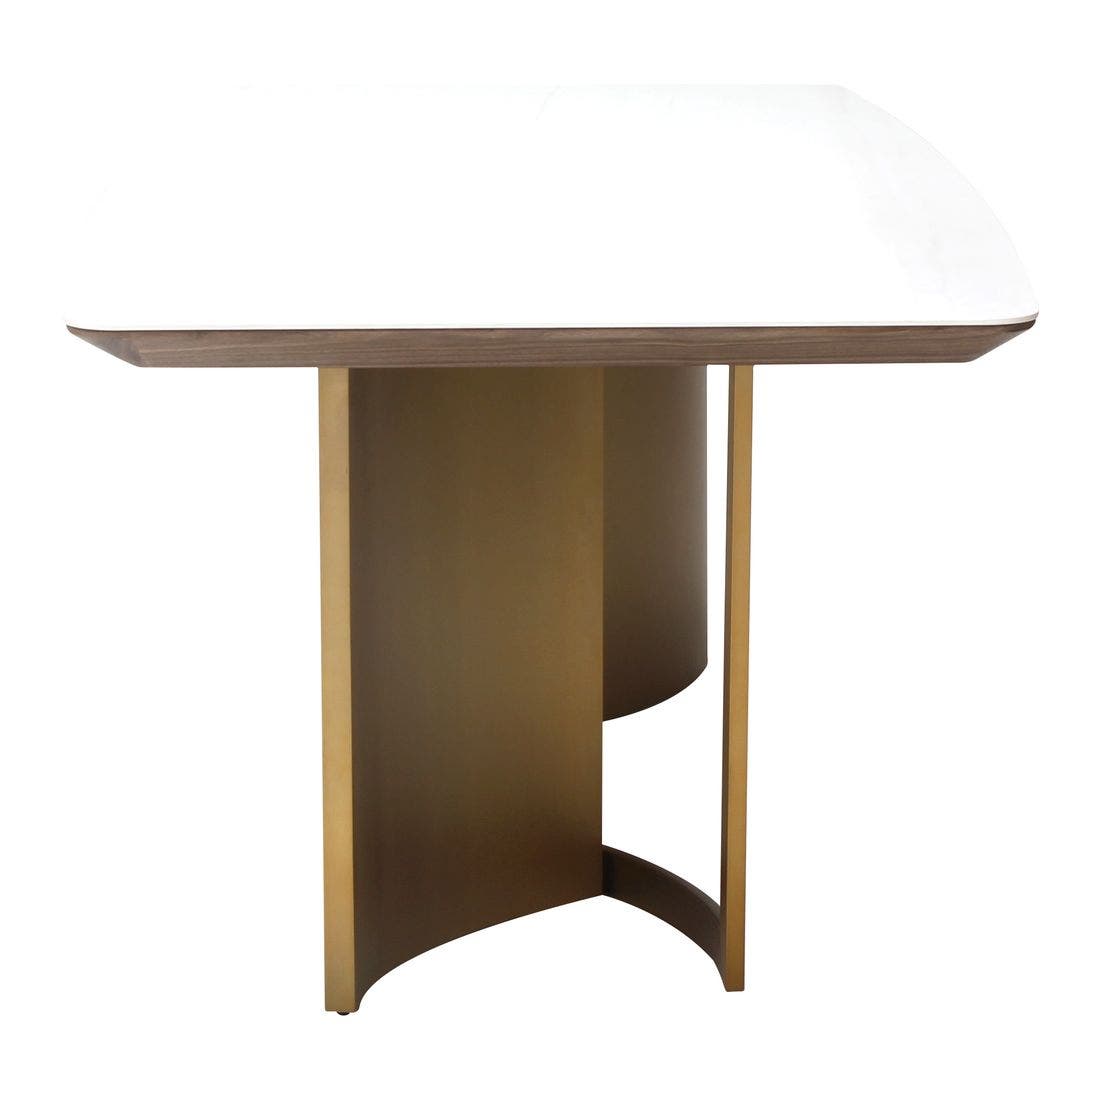 19170331-micasio-furniture-dining-room-dining-tables-31